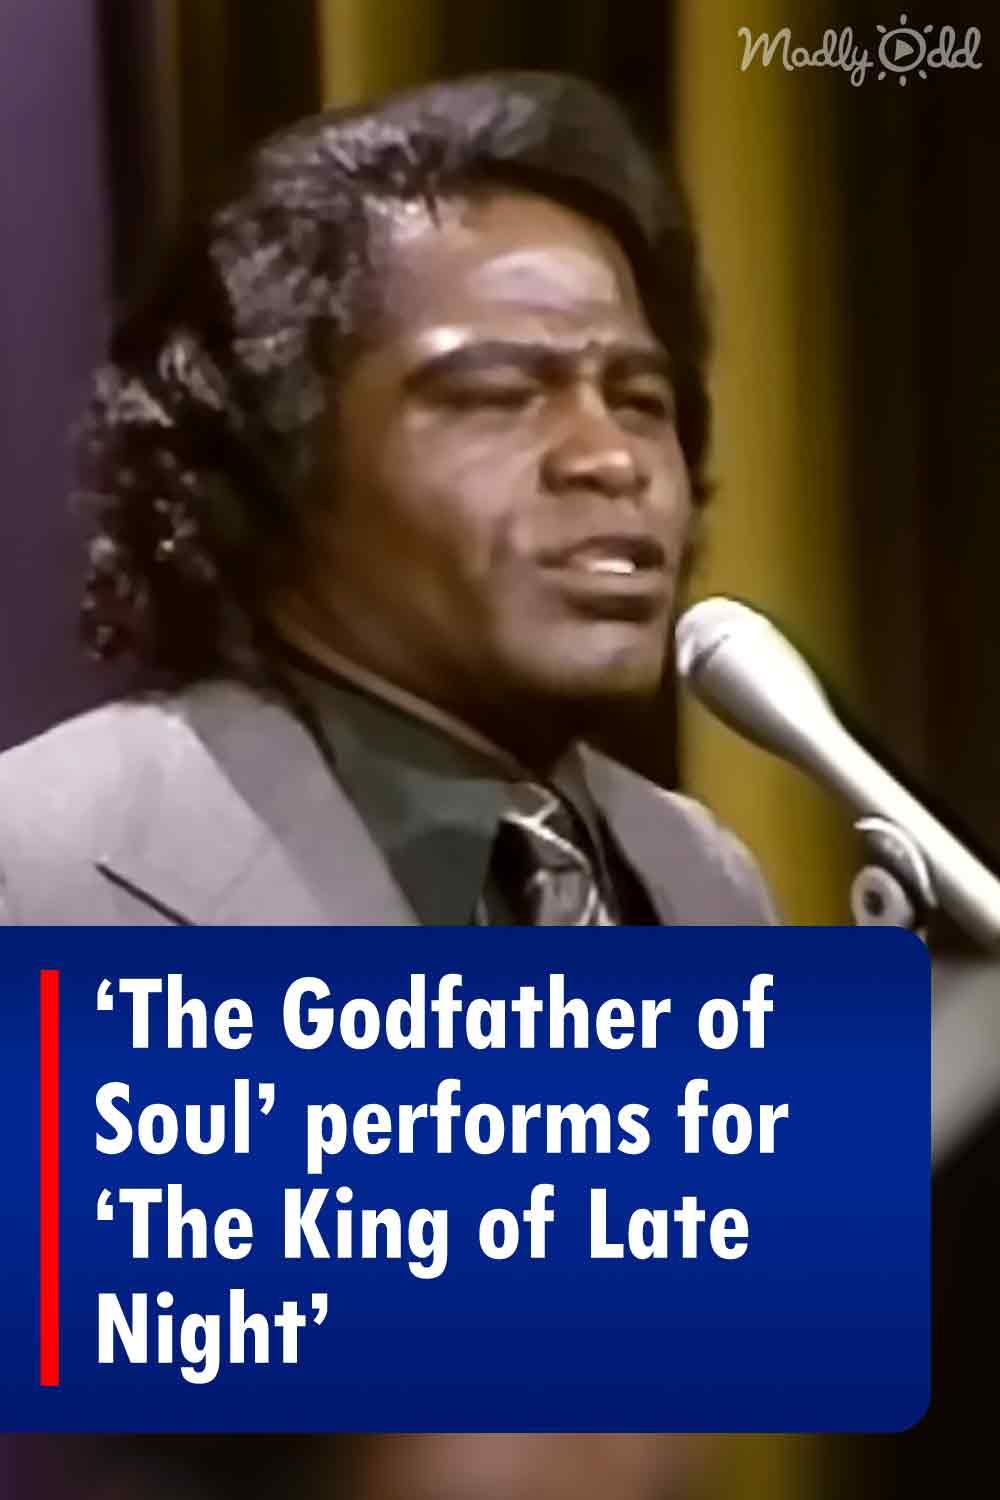 \'The Godfather of Soul’ performs for ‘The King of Late Night’